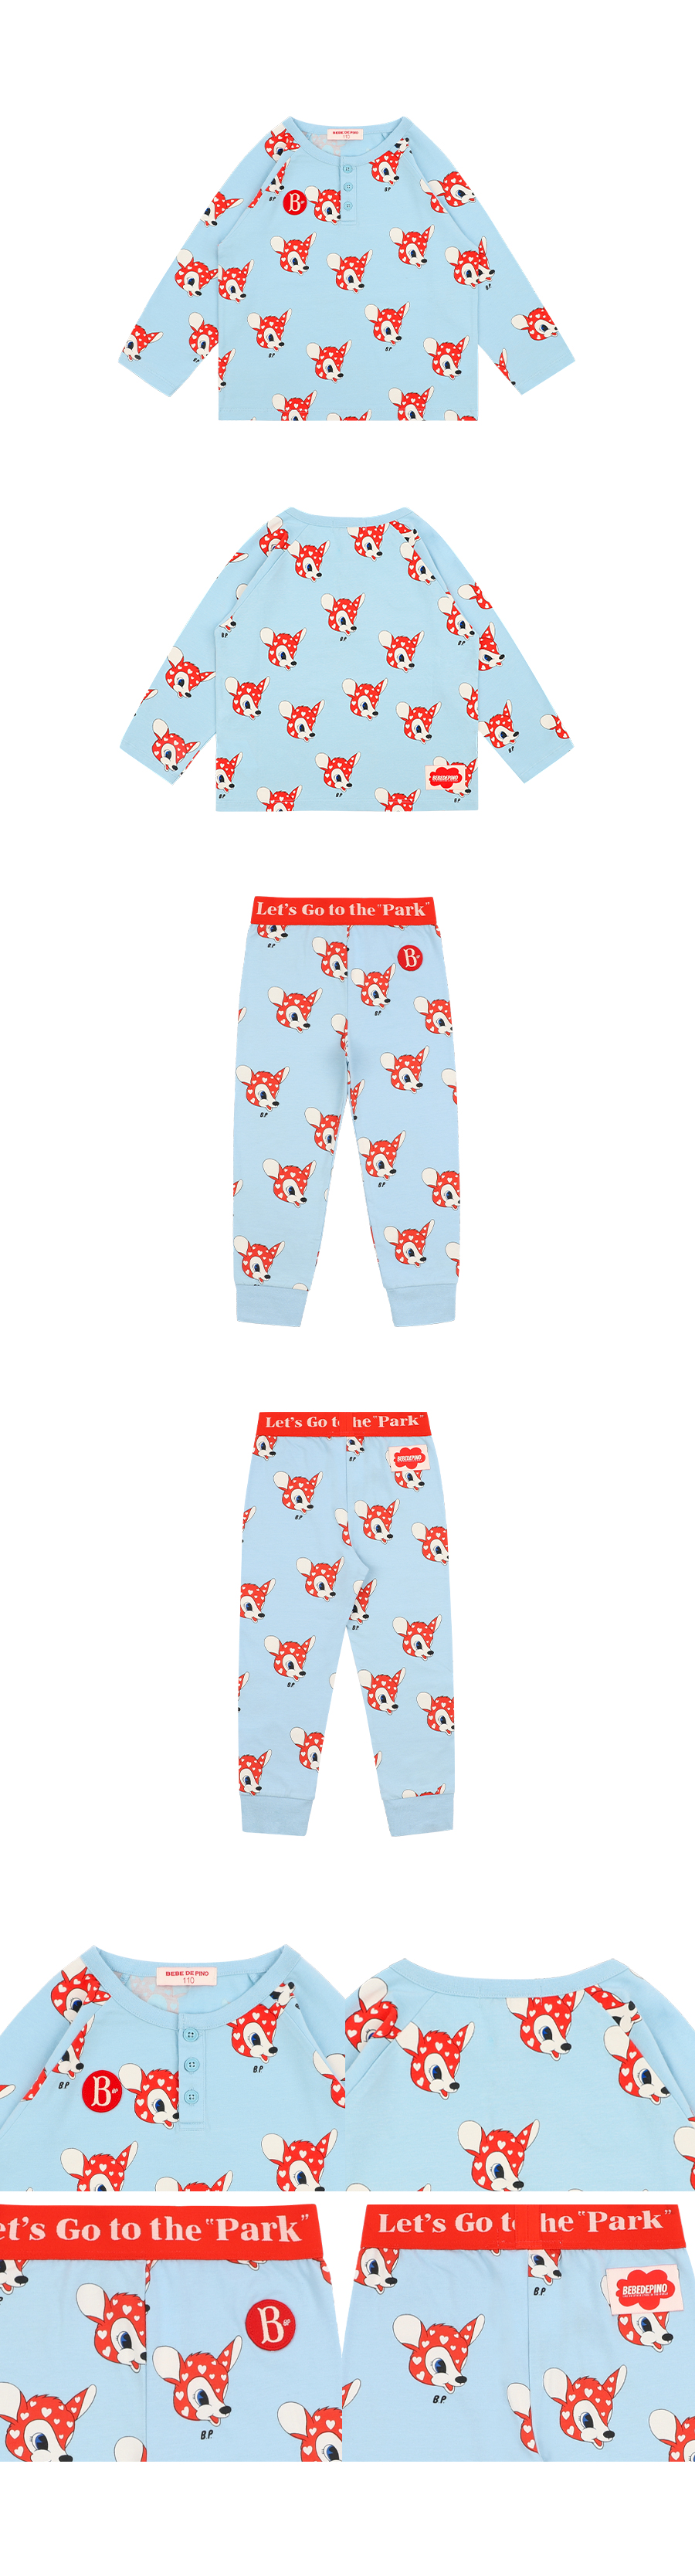 All over larry lounge wear set 상세 이미지